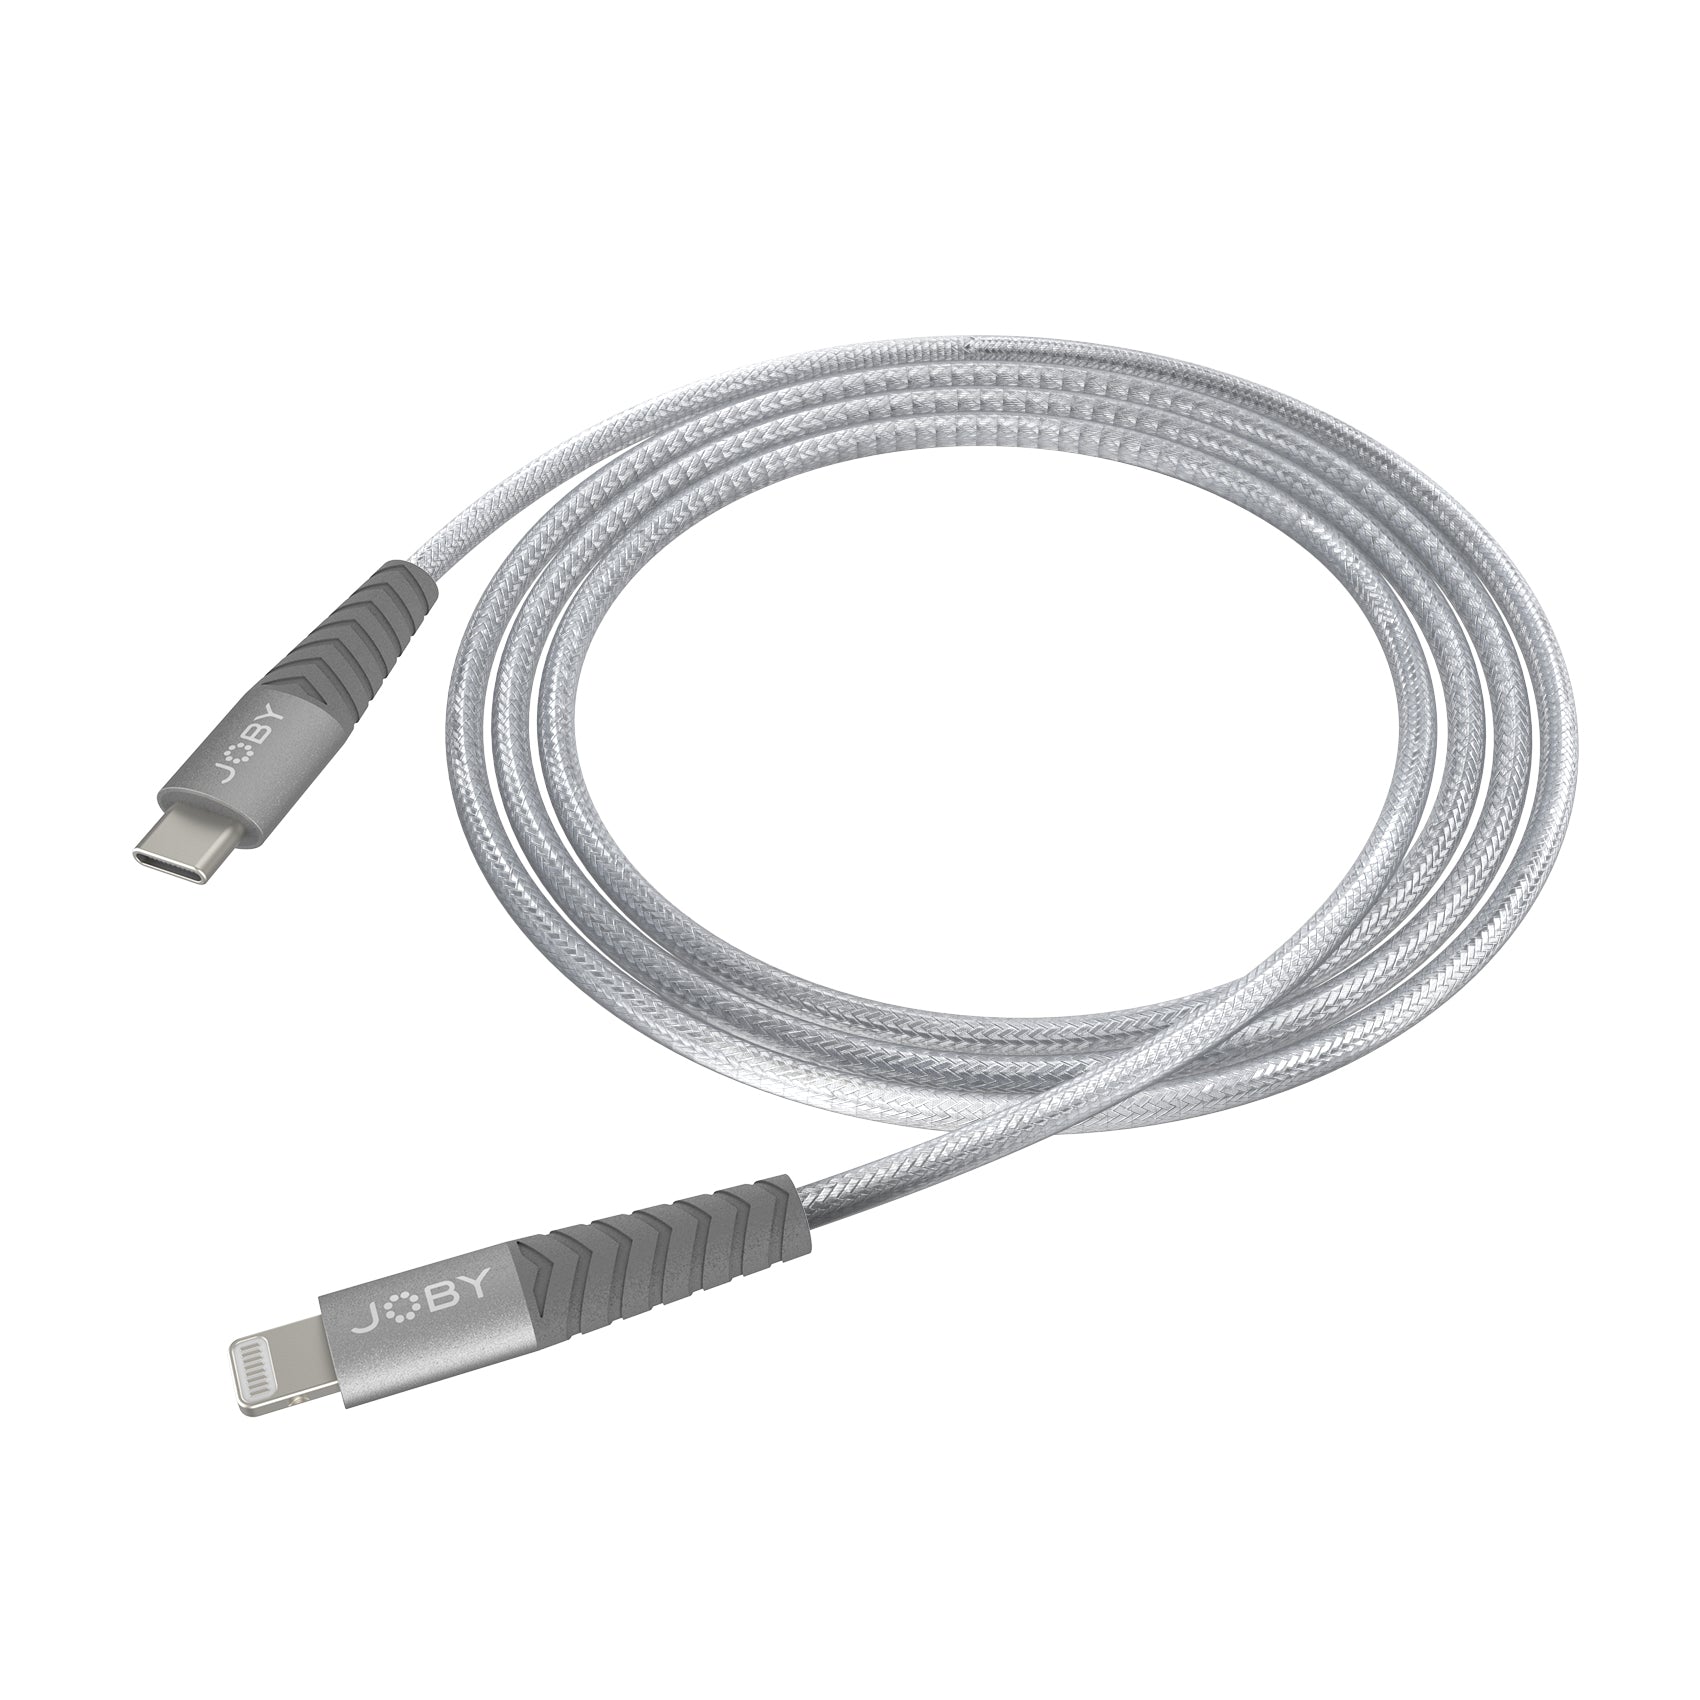 Joby USB-C to Lightning Cable - Space Grey -  - 2m/6ft